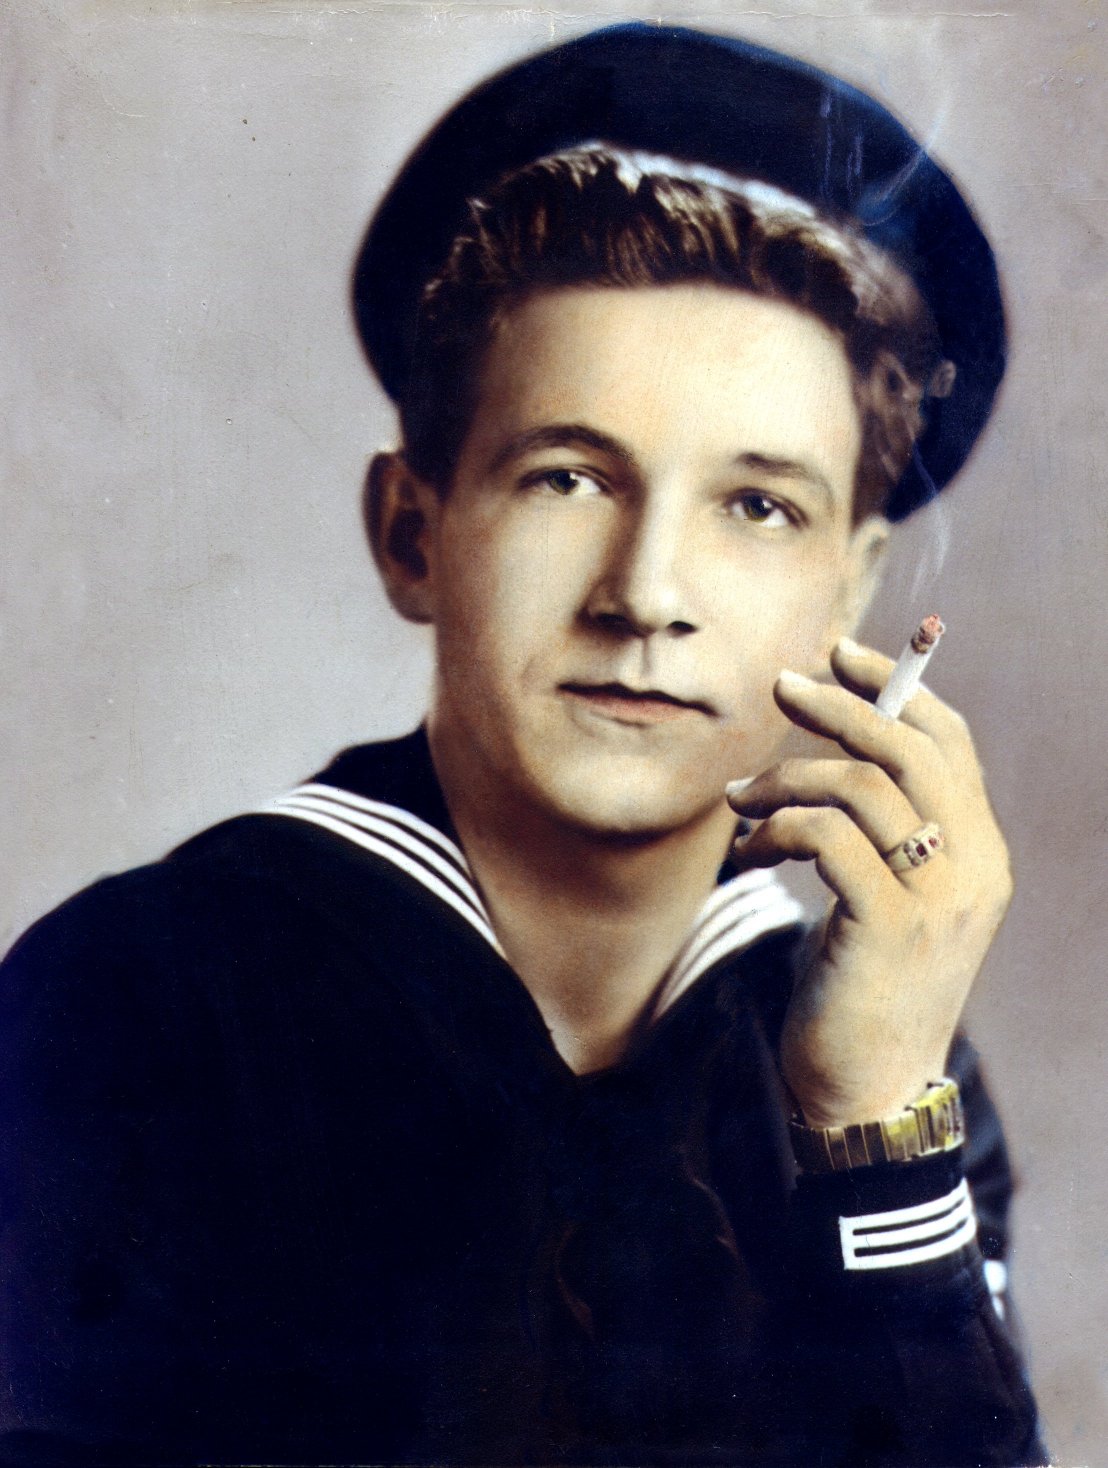 This was a portrait of my late Uncle Charles "Sonny" Haile taken around 1949 at the age of 17. (That's right, 17 years of age, he falsified records to get in the Navy). EDIT: I have since found out he did not falsify records, actually my Mother signed the papers to allow him into the Navy.